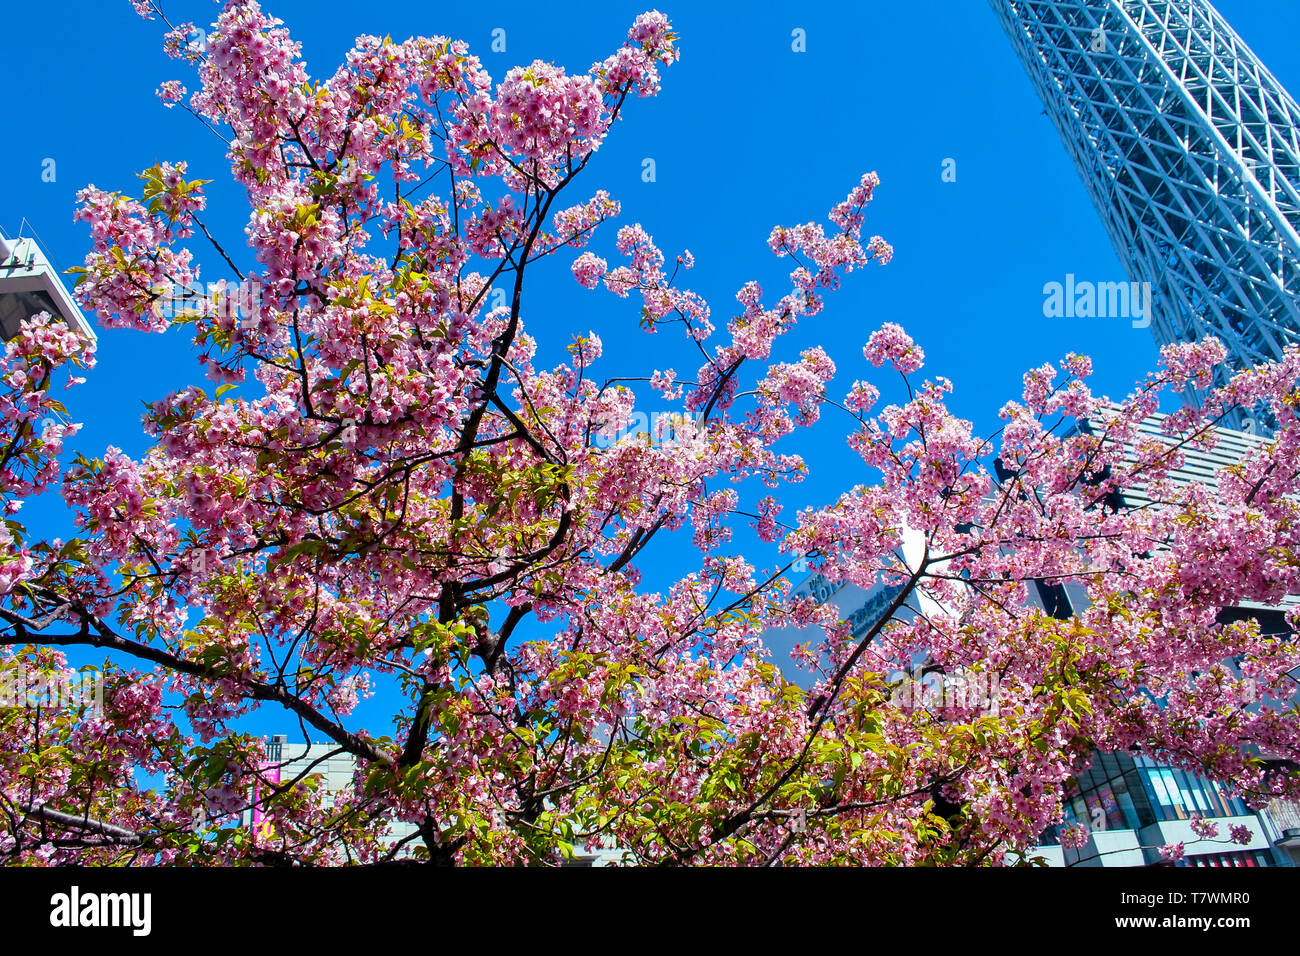 Broadcasting, restaurant and observation tower.  In front, Sakura trees.  Sumida, Tokyo, Japan. Stock Photo